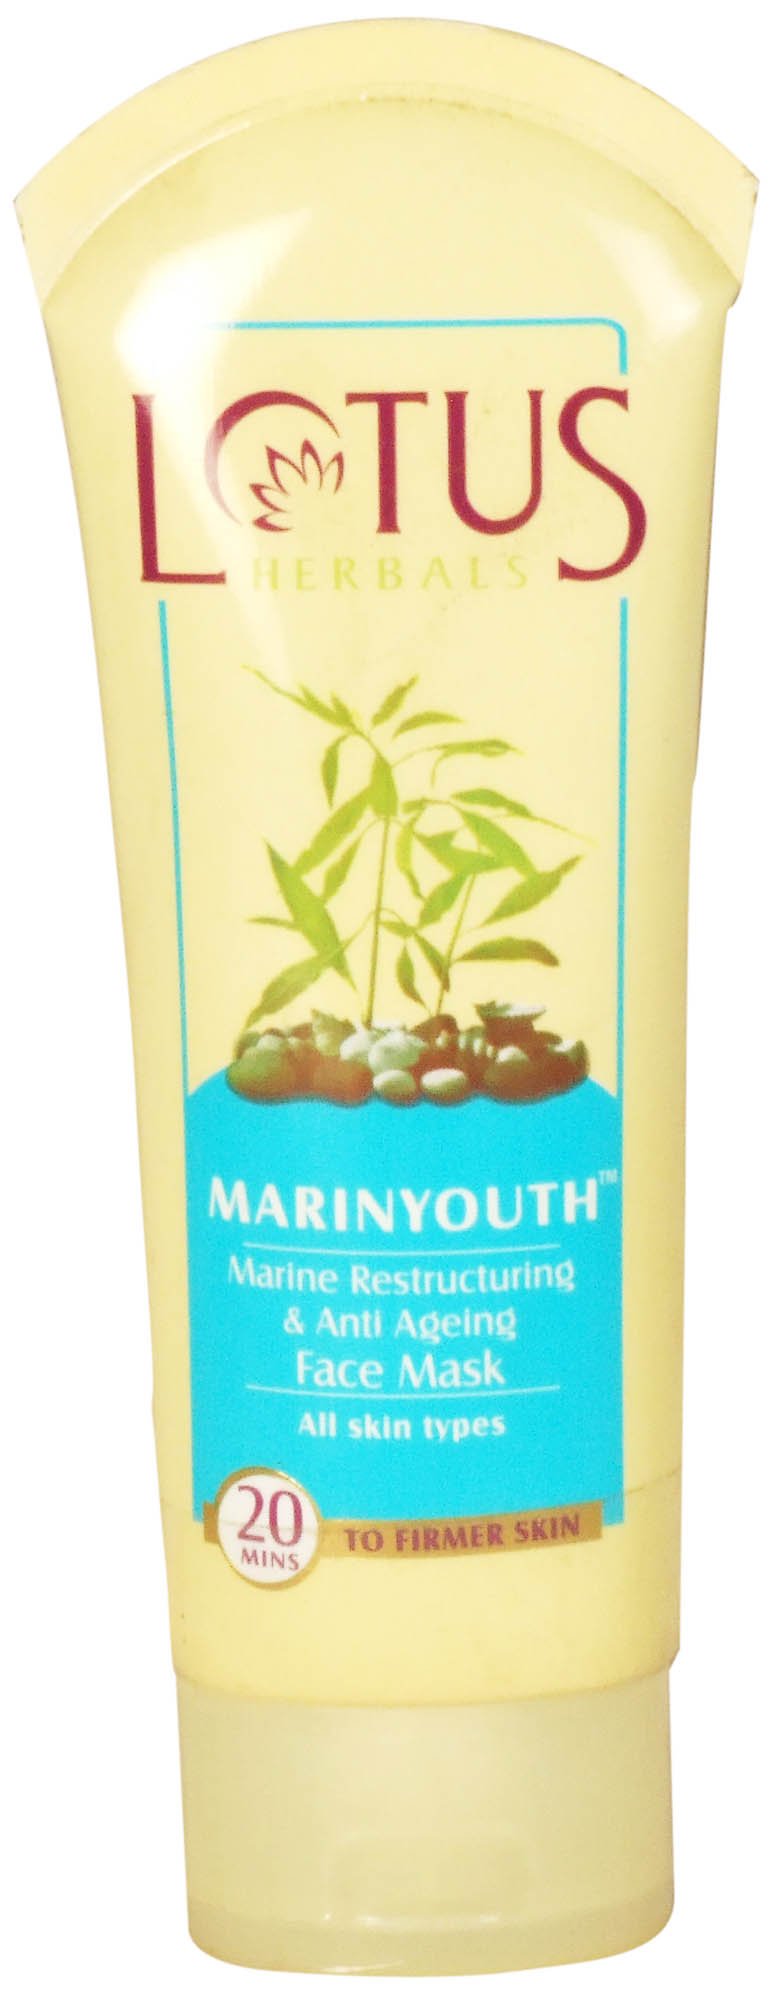 Marinyouth (Marine Restructuring & Anti Ageing Face Mask) (All Skin Types) - book cover